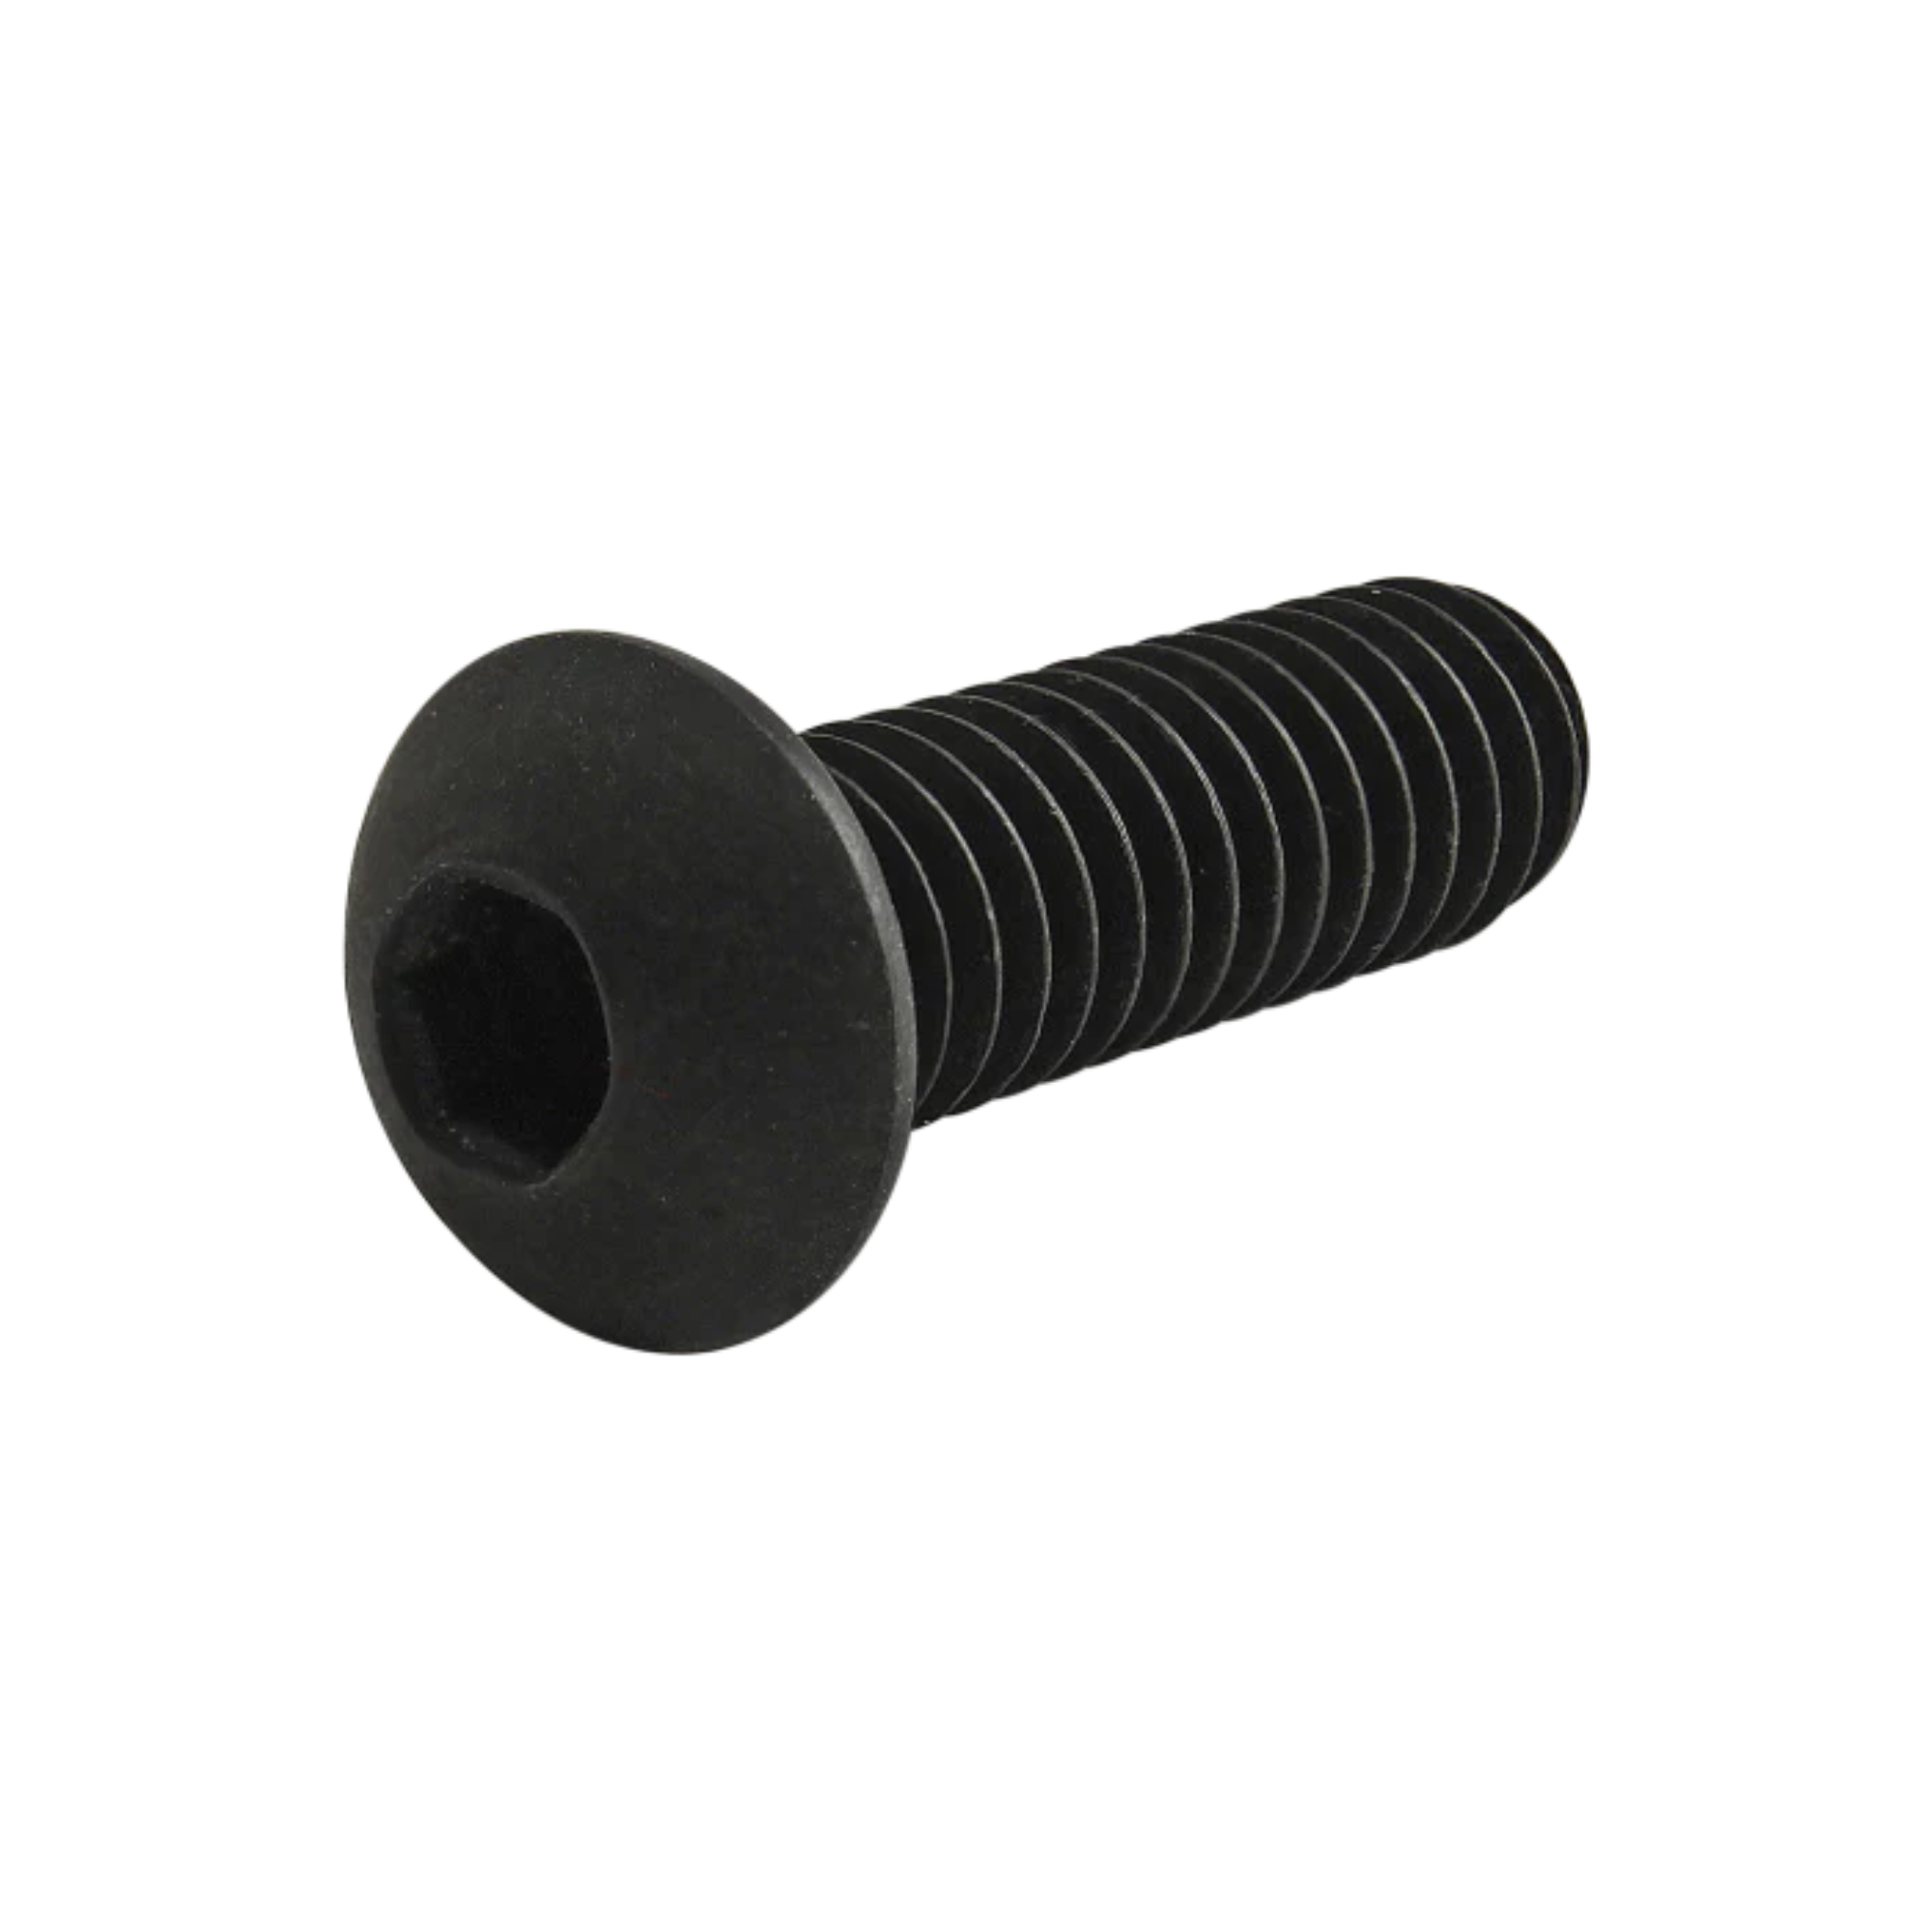 side view of a black button head screw with the head on the left and the threaded stem pointing toward the right